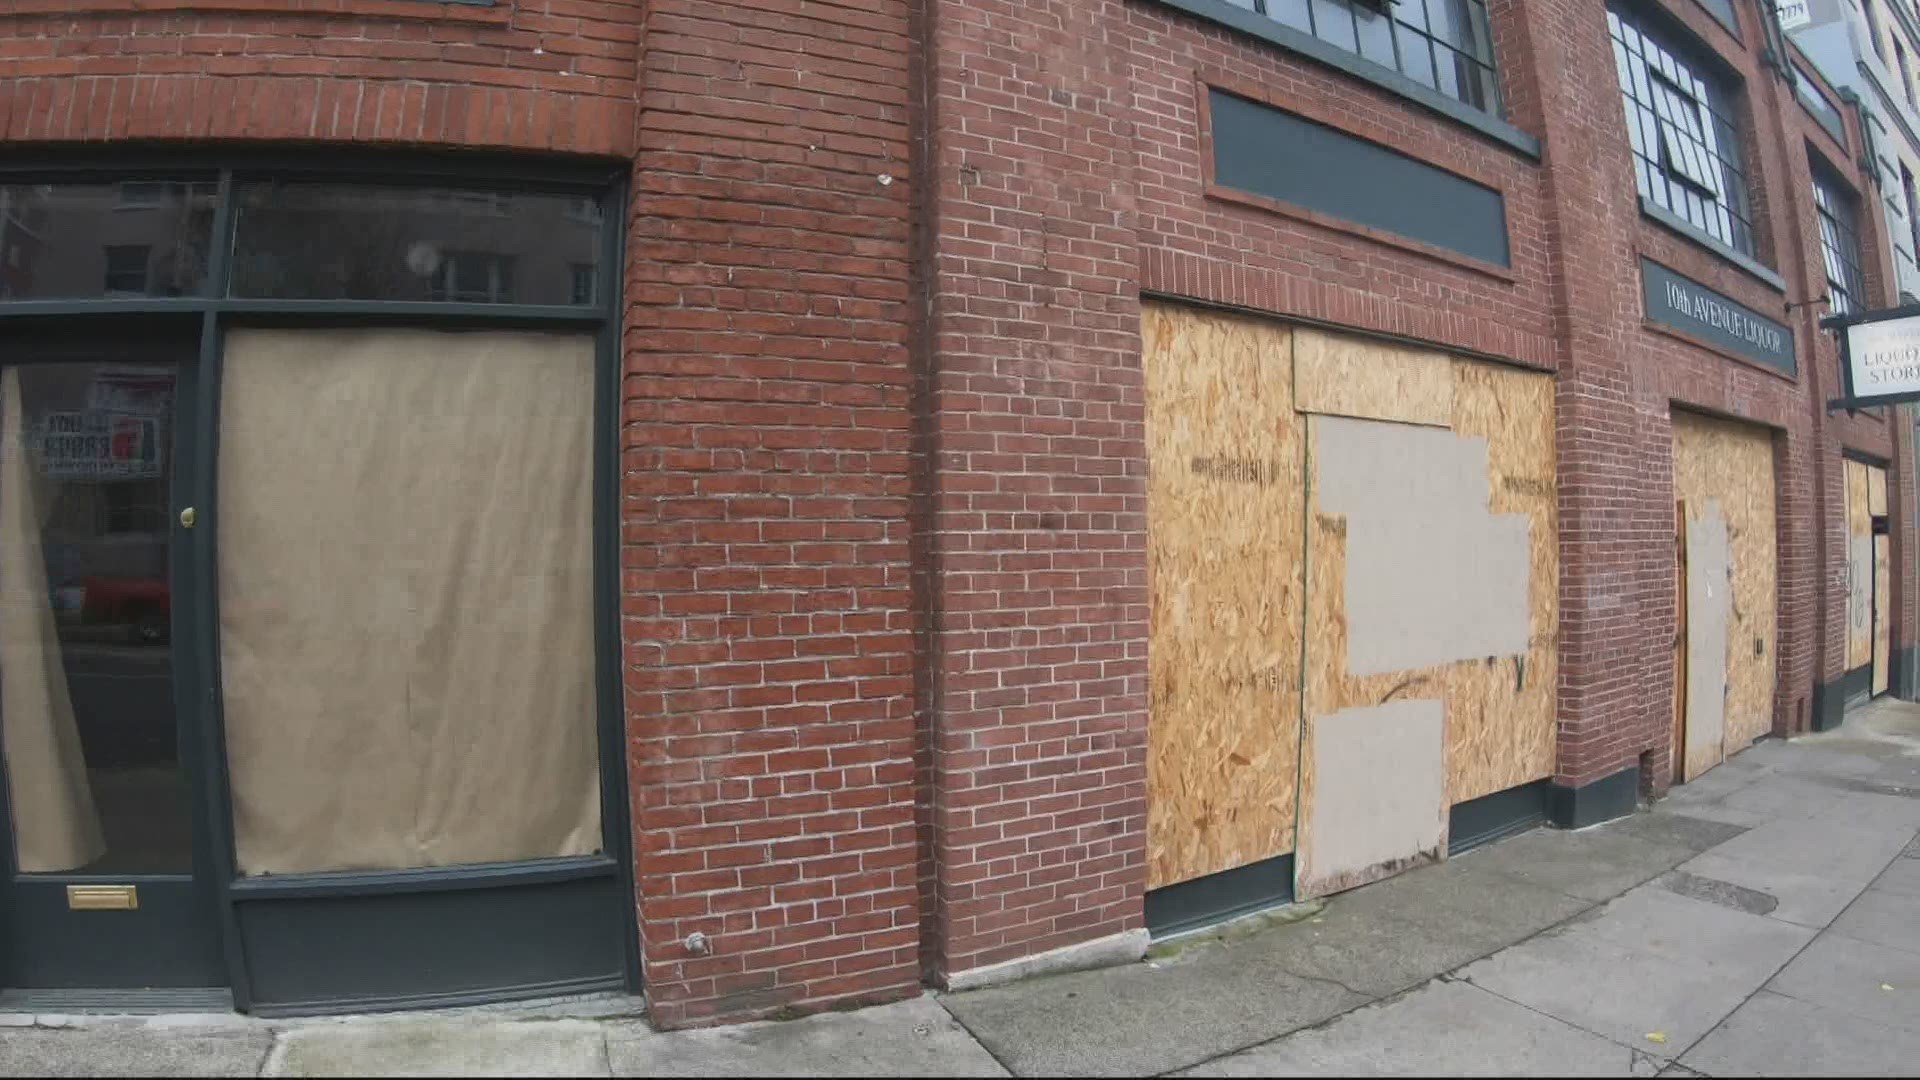 As business look to reopen, owners are calling for action to address vandalism, trash and safety concerns in downtown Portland.